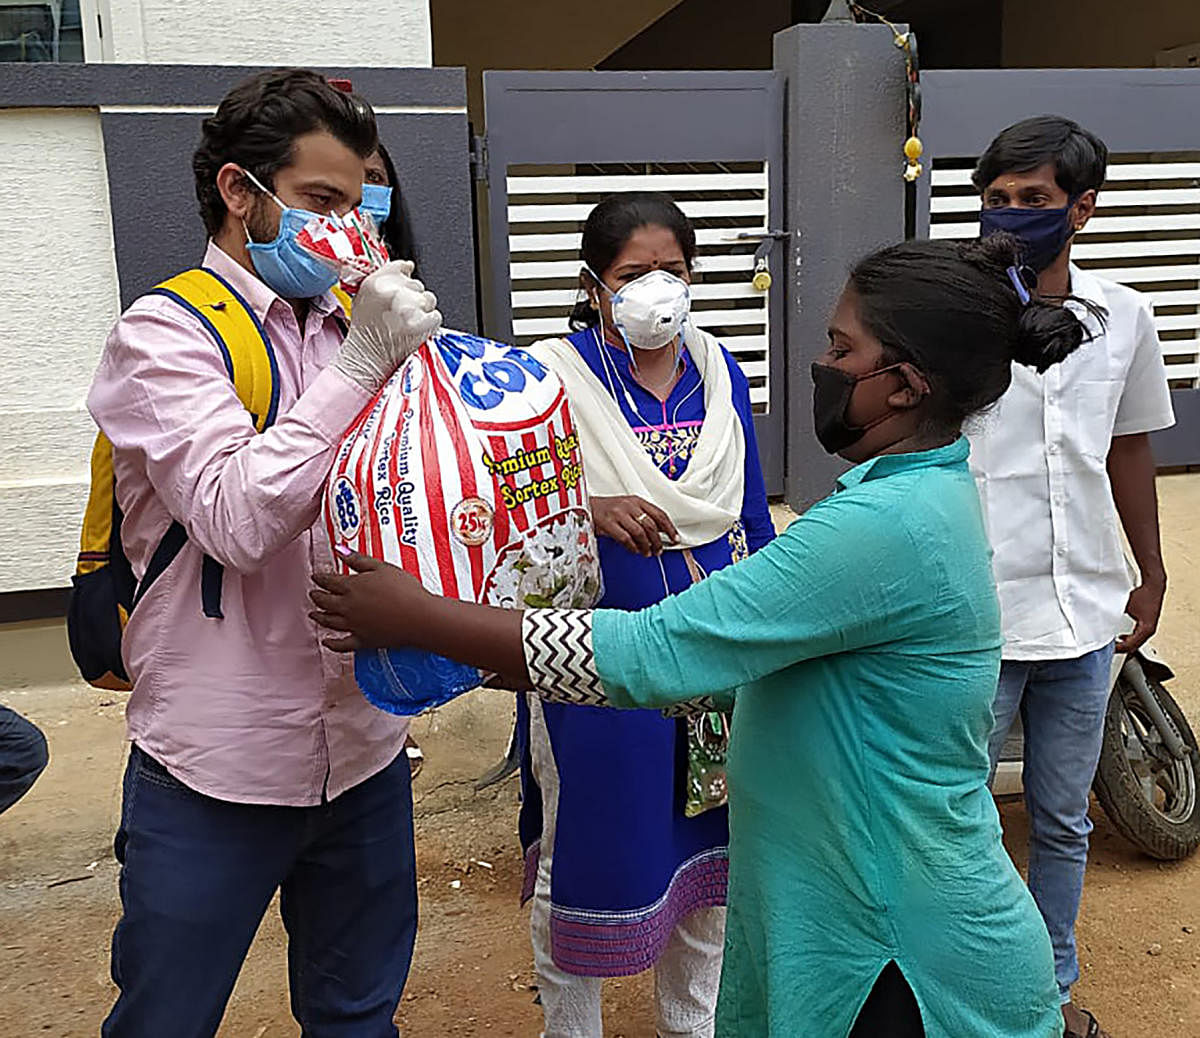 Volunteers of The Satsang Foundation, Bengaluru hand over 14-days provision boxes to migrant workers in Thanisandra in Bengaluru. DH Photo